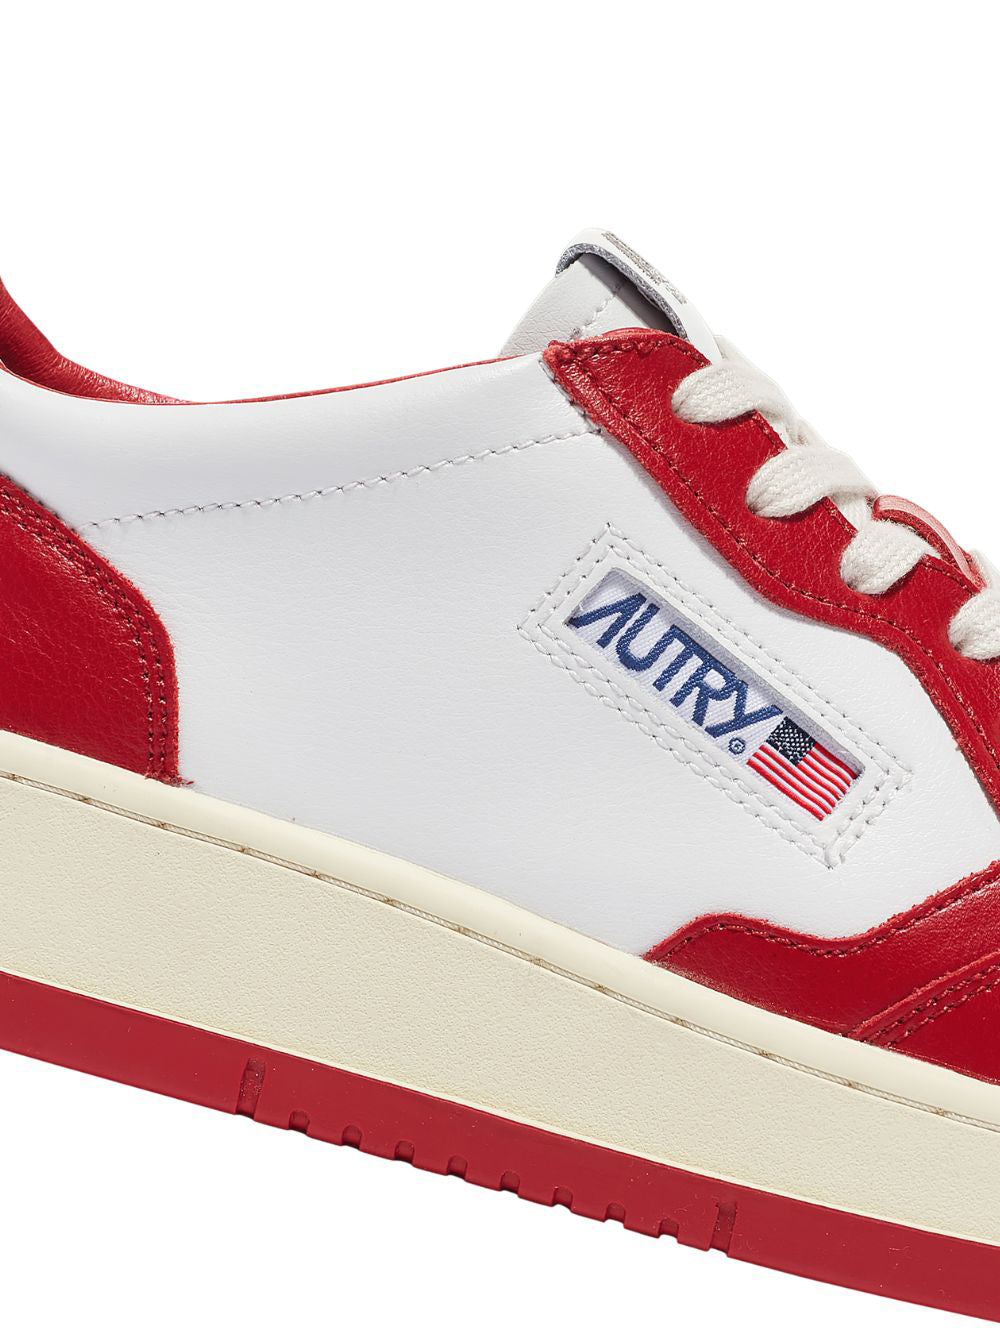 Medalist Low Sneakers In Two-Tone Leather (White And Red) (Women)